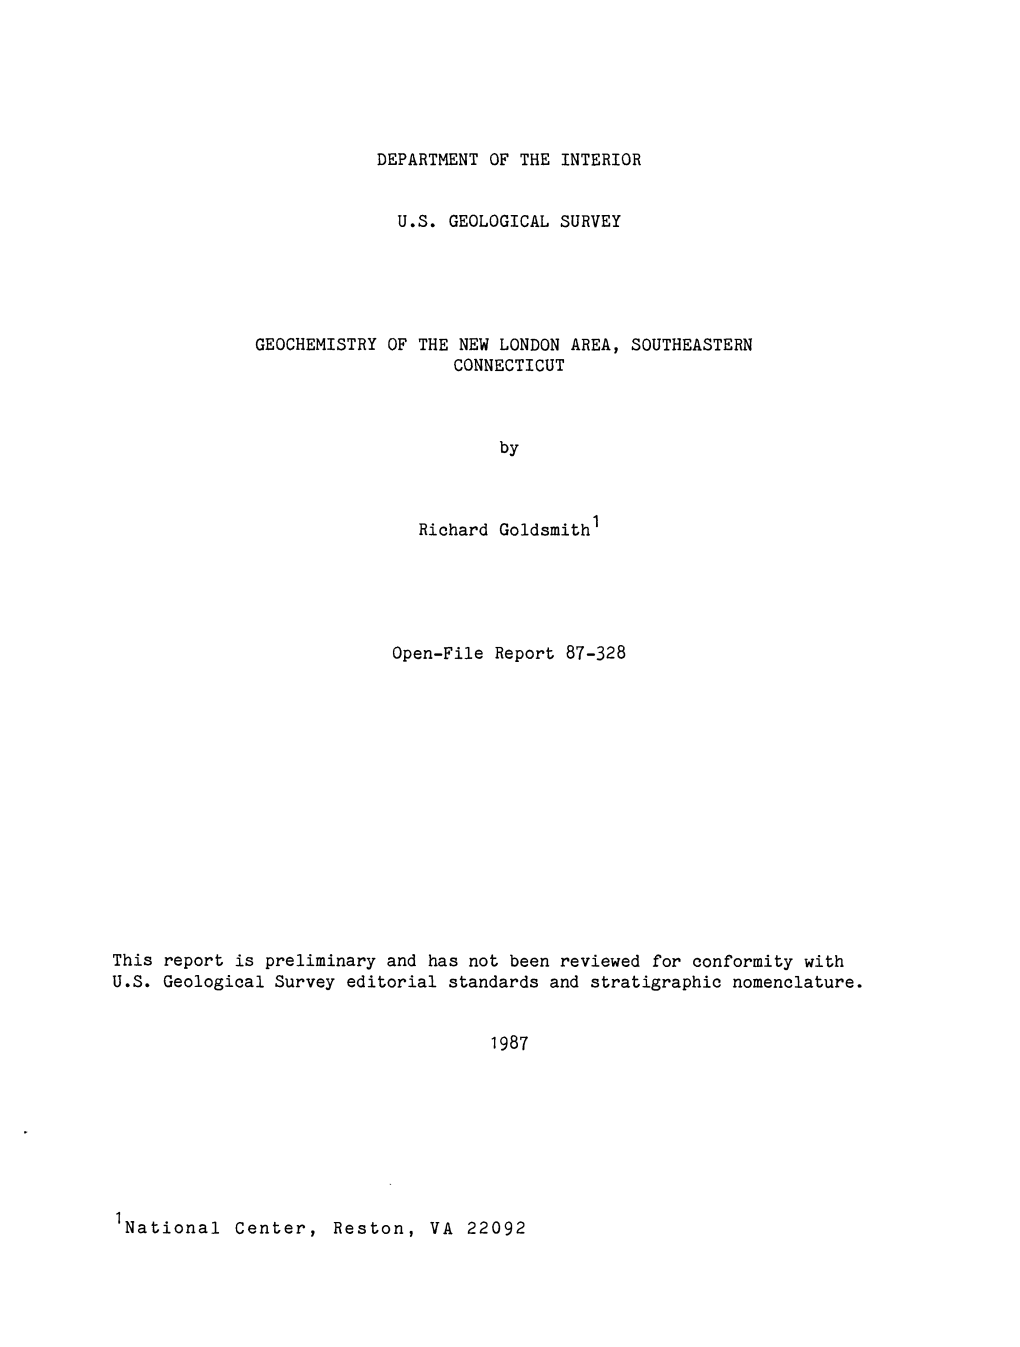 Richard Goldsmith Open-File Report 87-328 This Report Is Preliminary